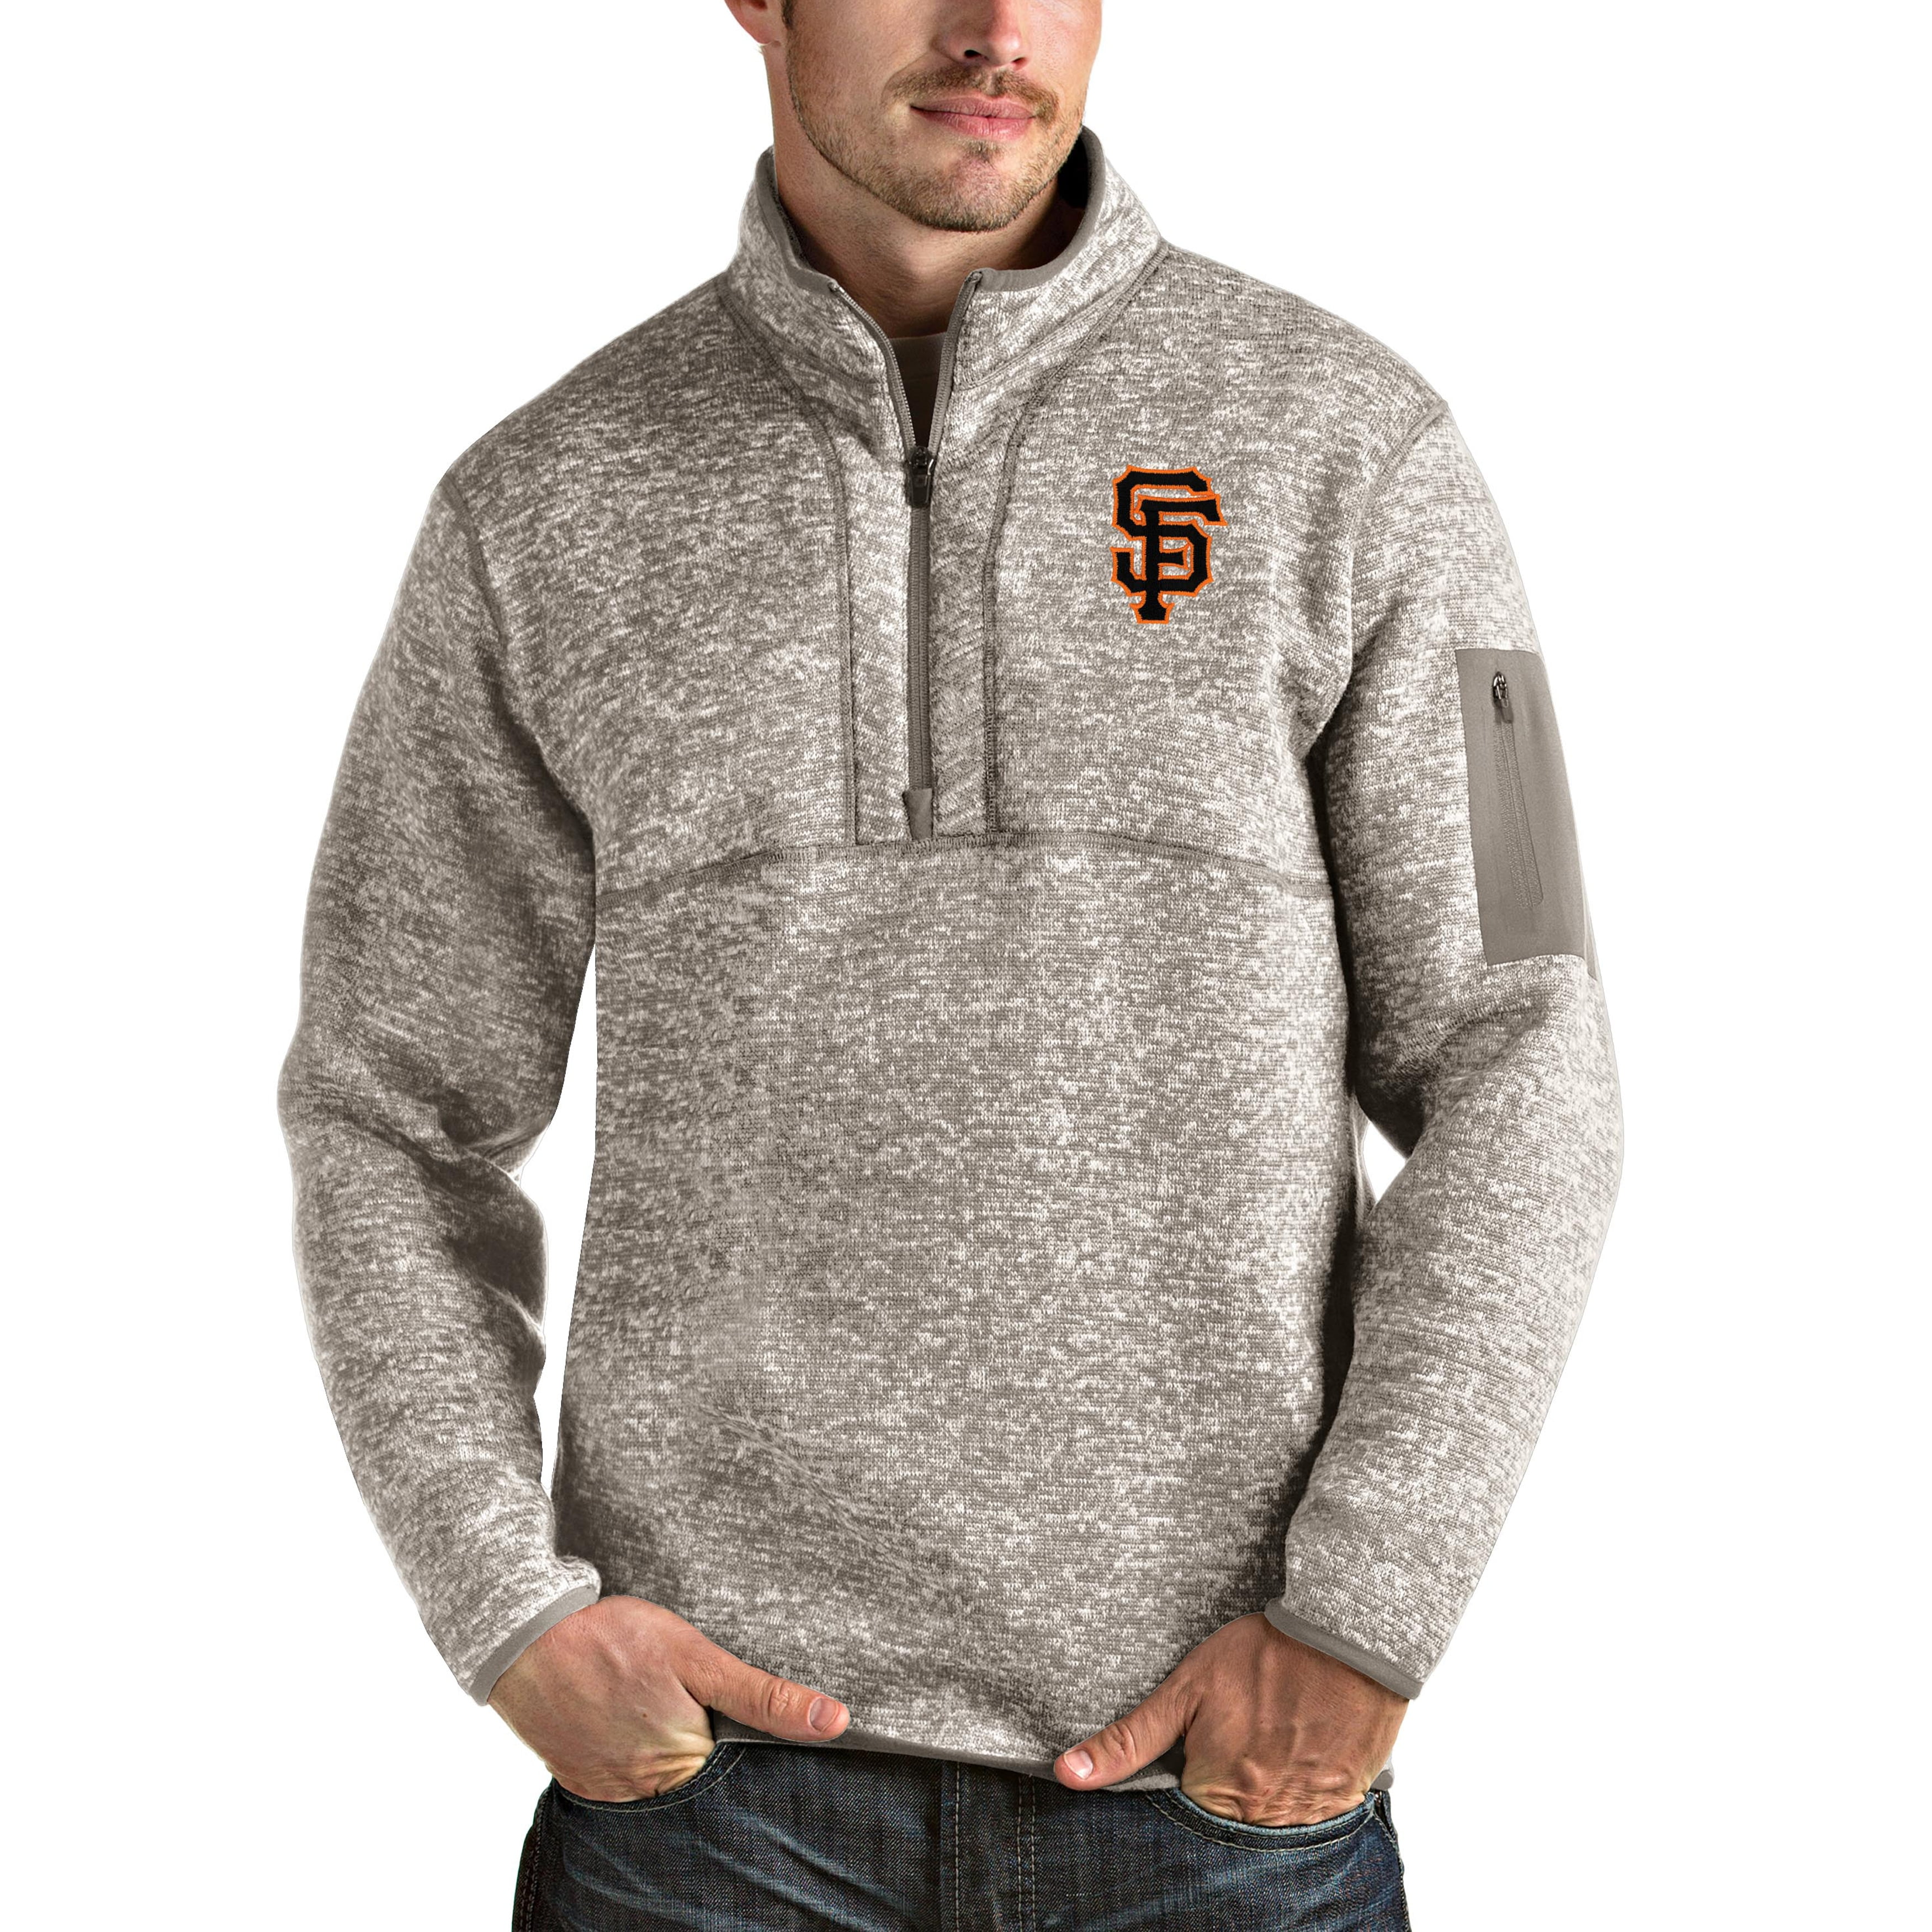 Top of the World Mens Quarter Zip Sweatshirt Light Gray Heather Applique Embroidered Icon 